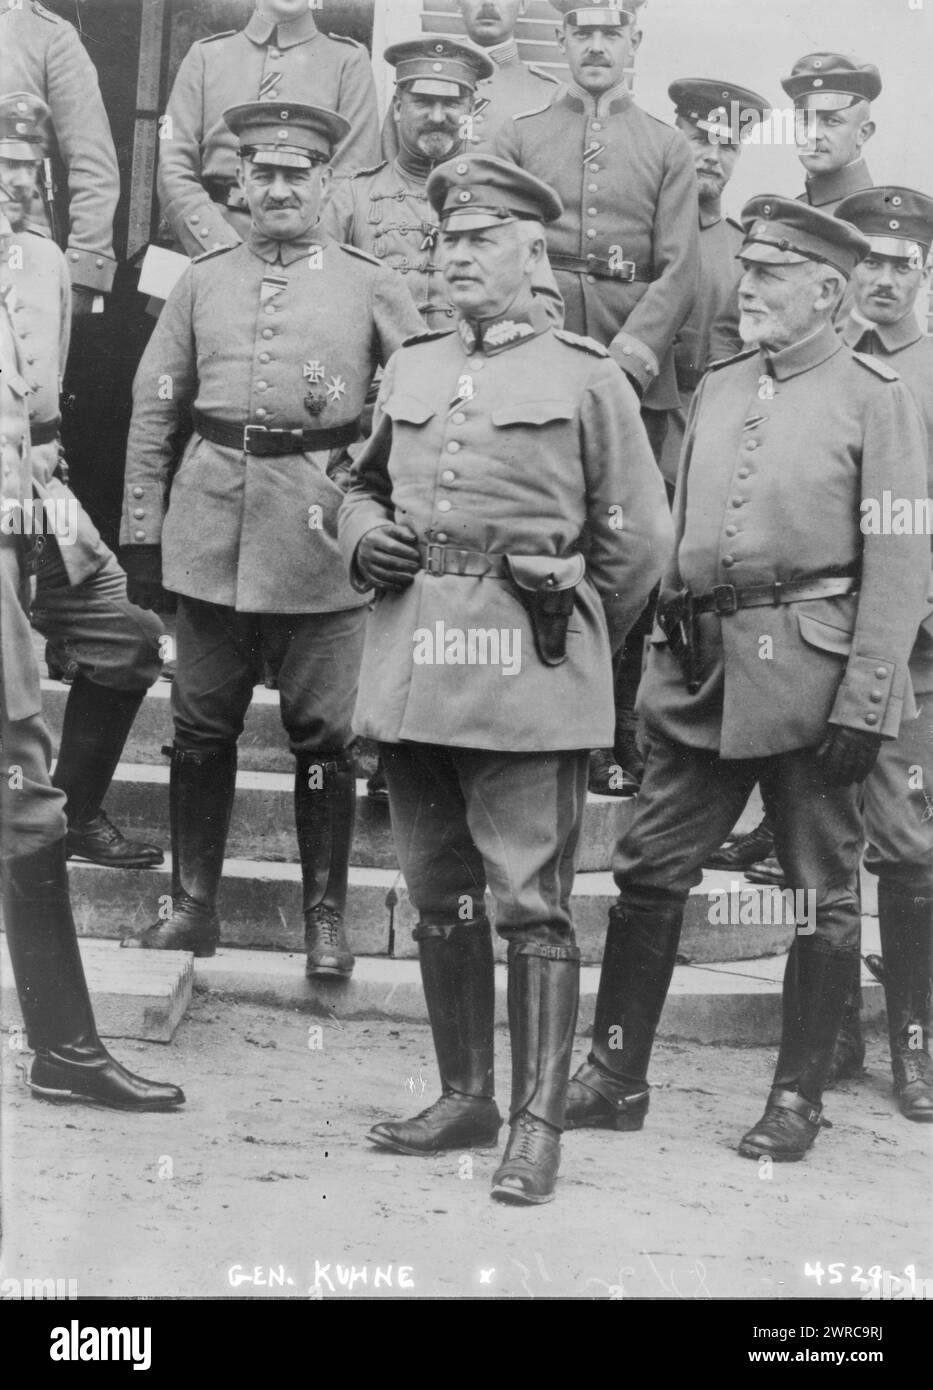 Gen. Kuhne, Photograph shows Otto Viktor Kühne (1857-1945) who was a German general during World War I., between ca. 1915 and ca. 1920, World War, 1914-1918, Glass negatives, 1 negative: glass Stock Photo